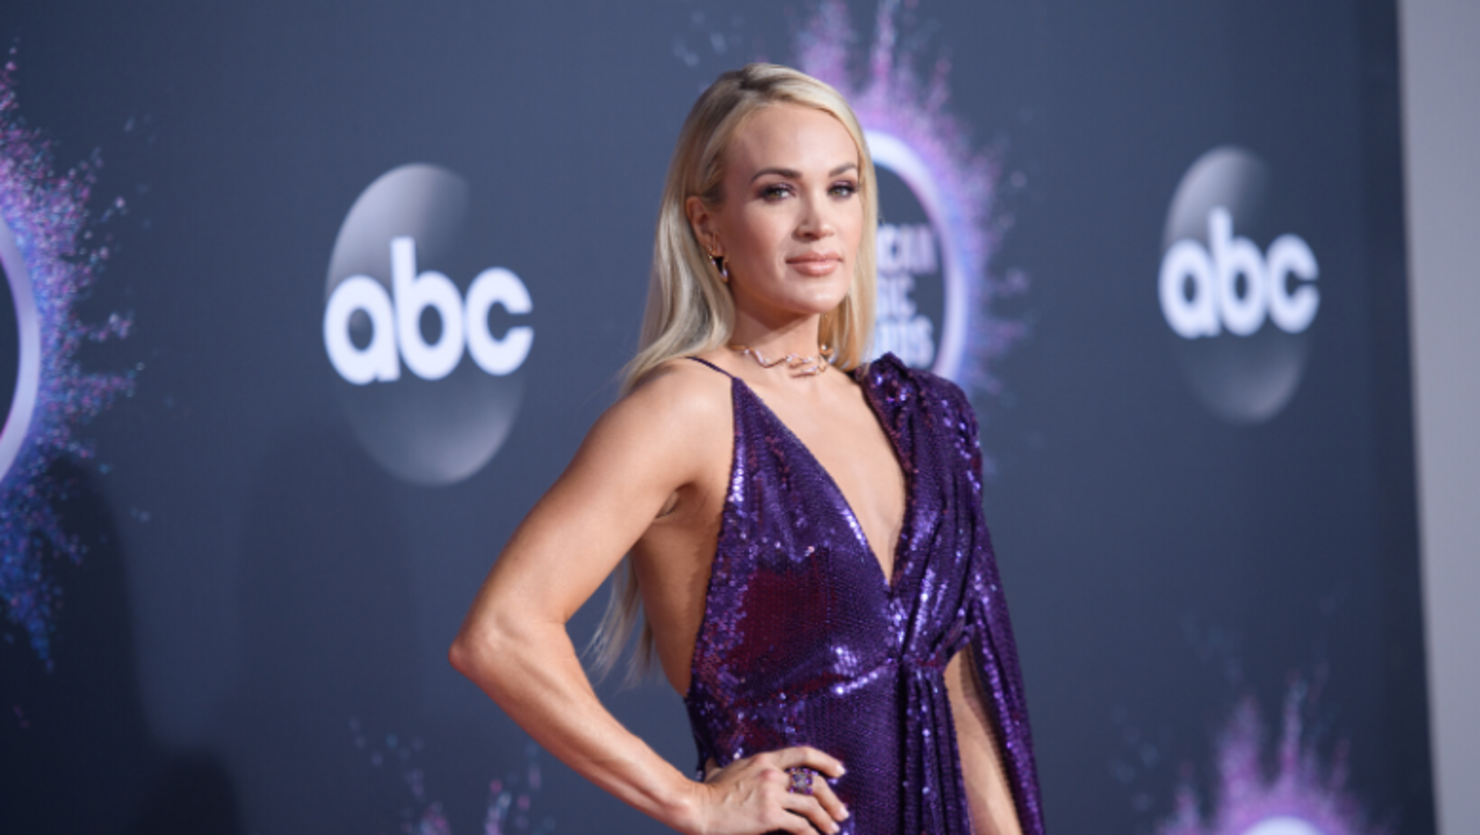 Carrie Underwood Shares Most Memorable Moment Of 2019 With Adorable Photo